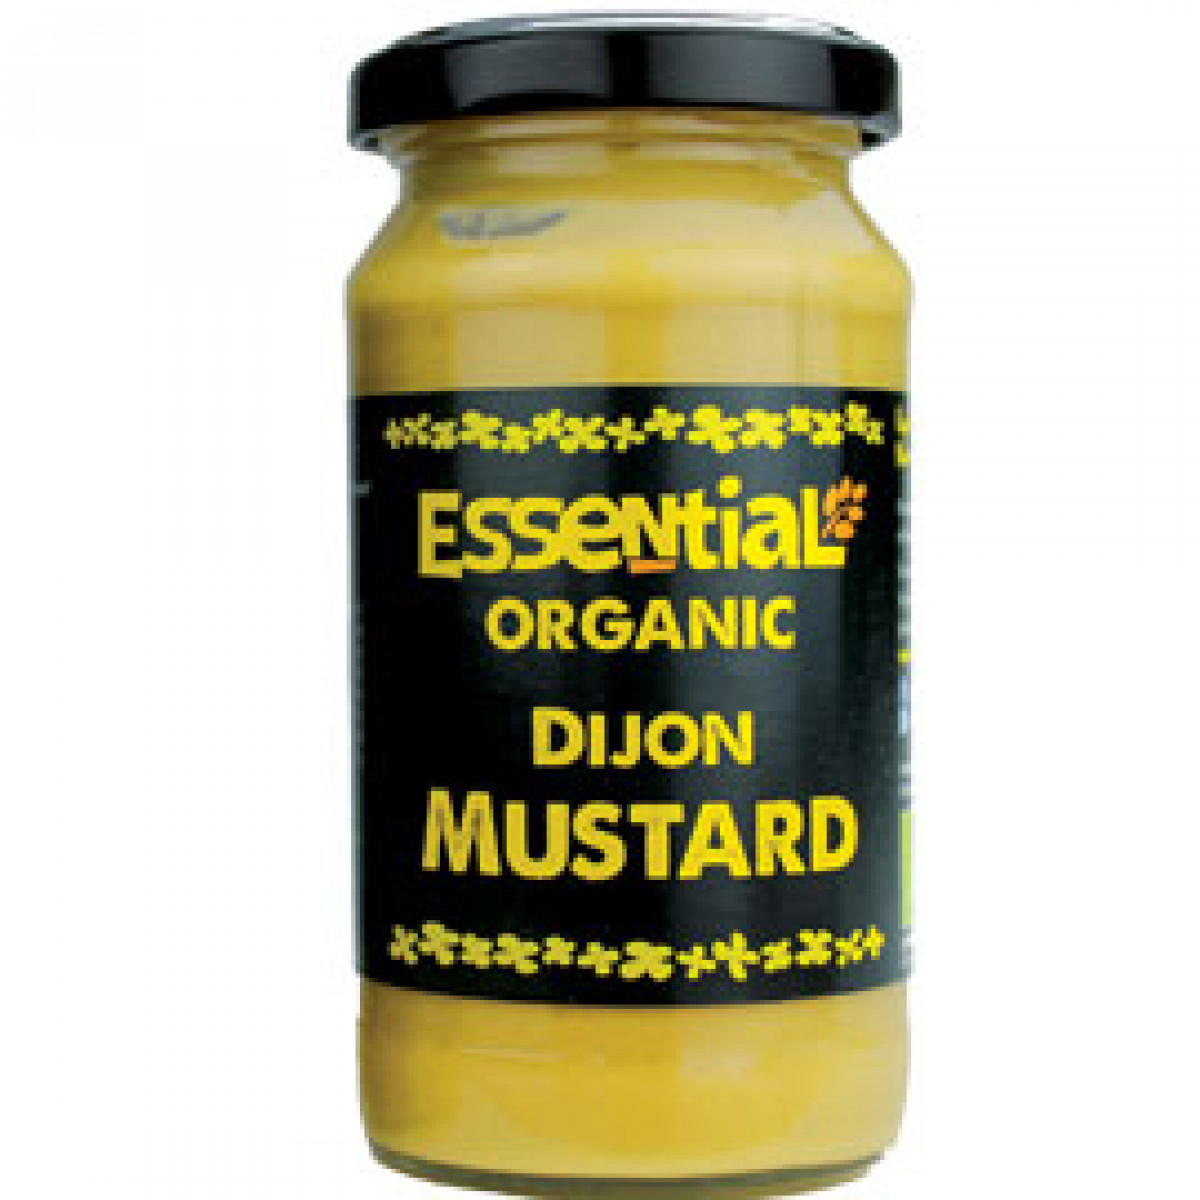 Product picture for Mustard Dijon